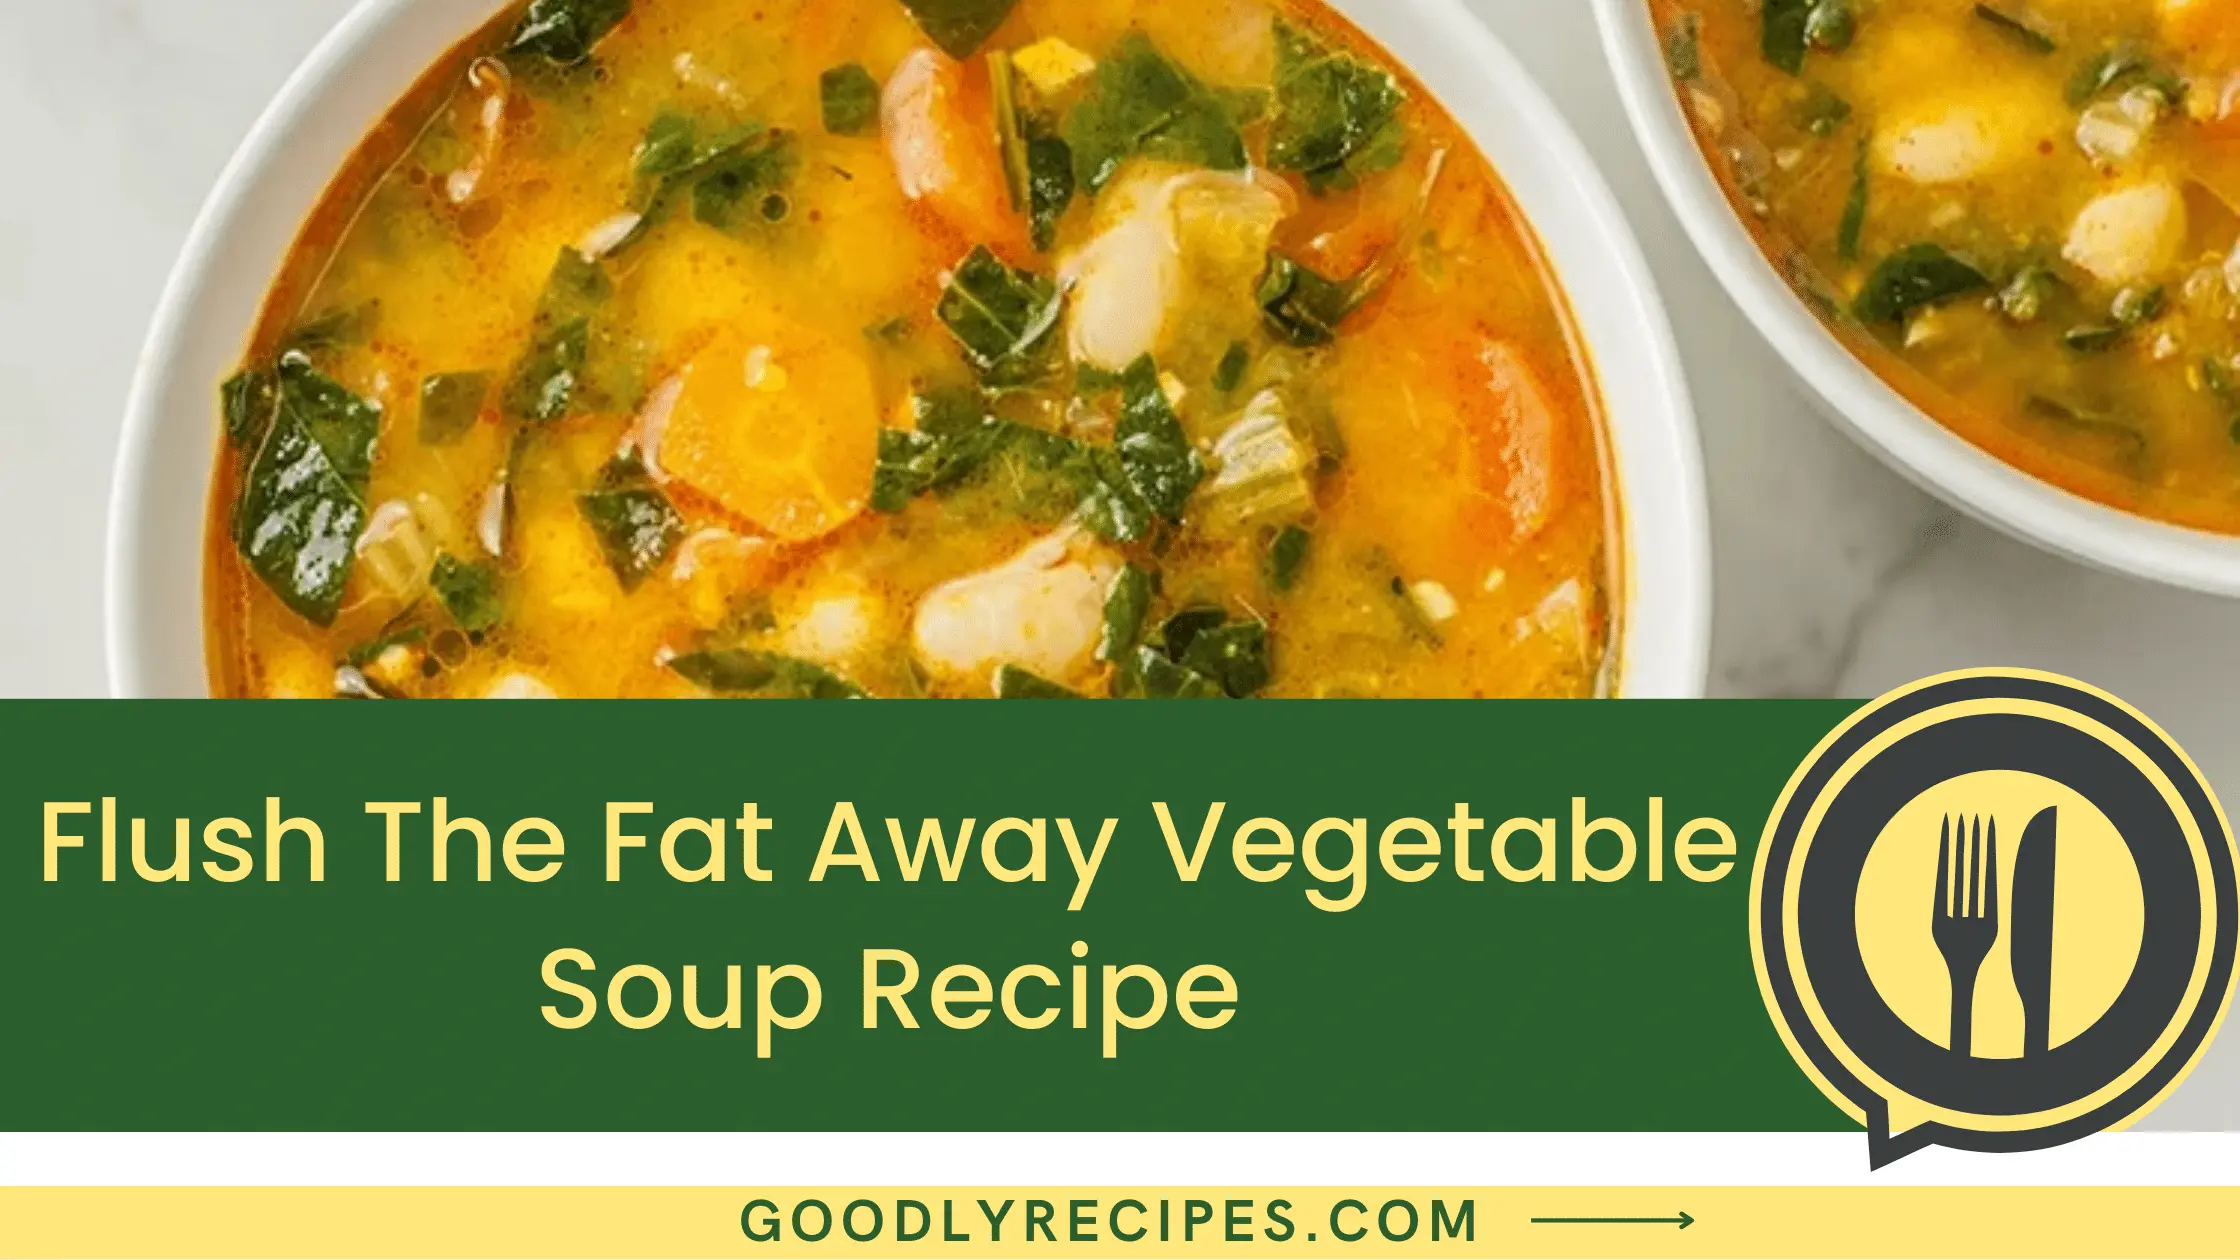 What is Flush the Fat Away Vegetable Soup?